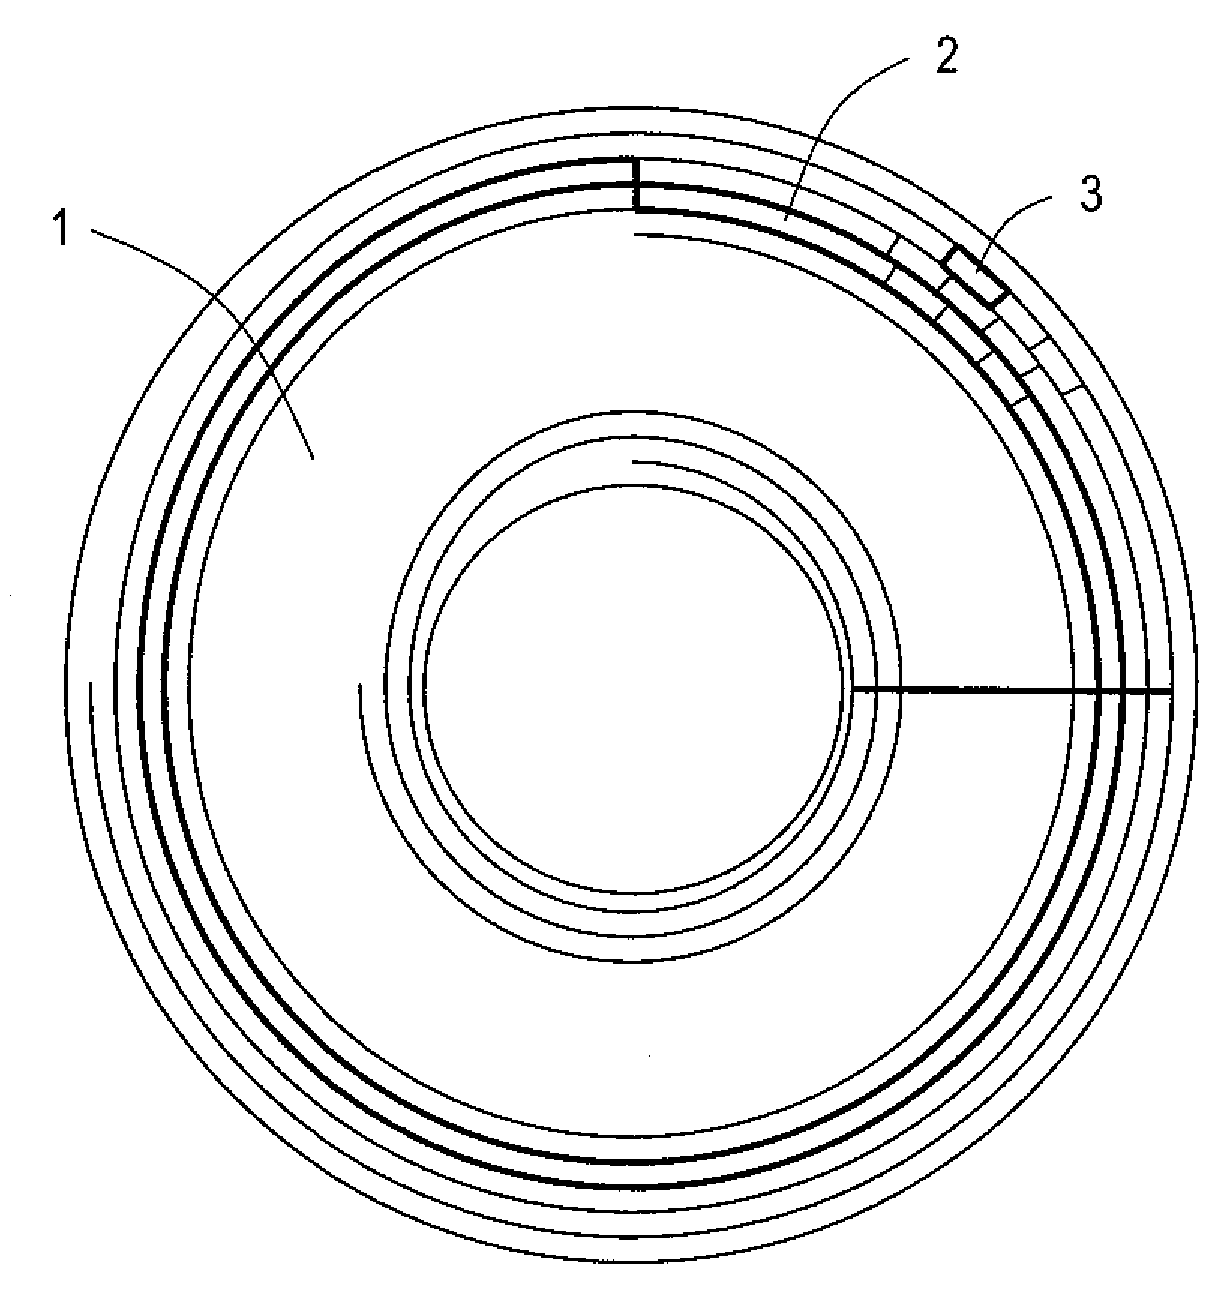 Optical disc, optical disc drive, optical disc recording/reproducing method, and integrated circuit